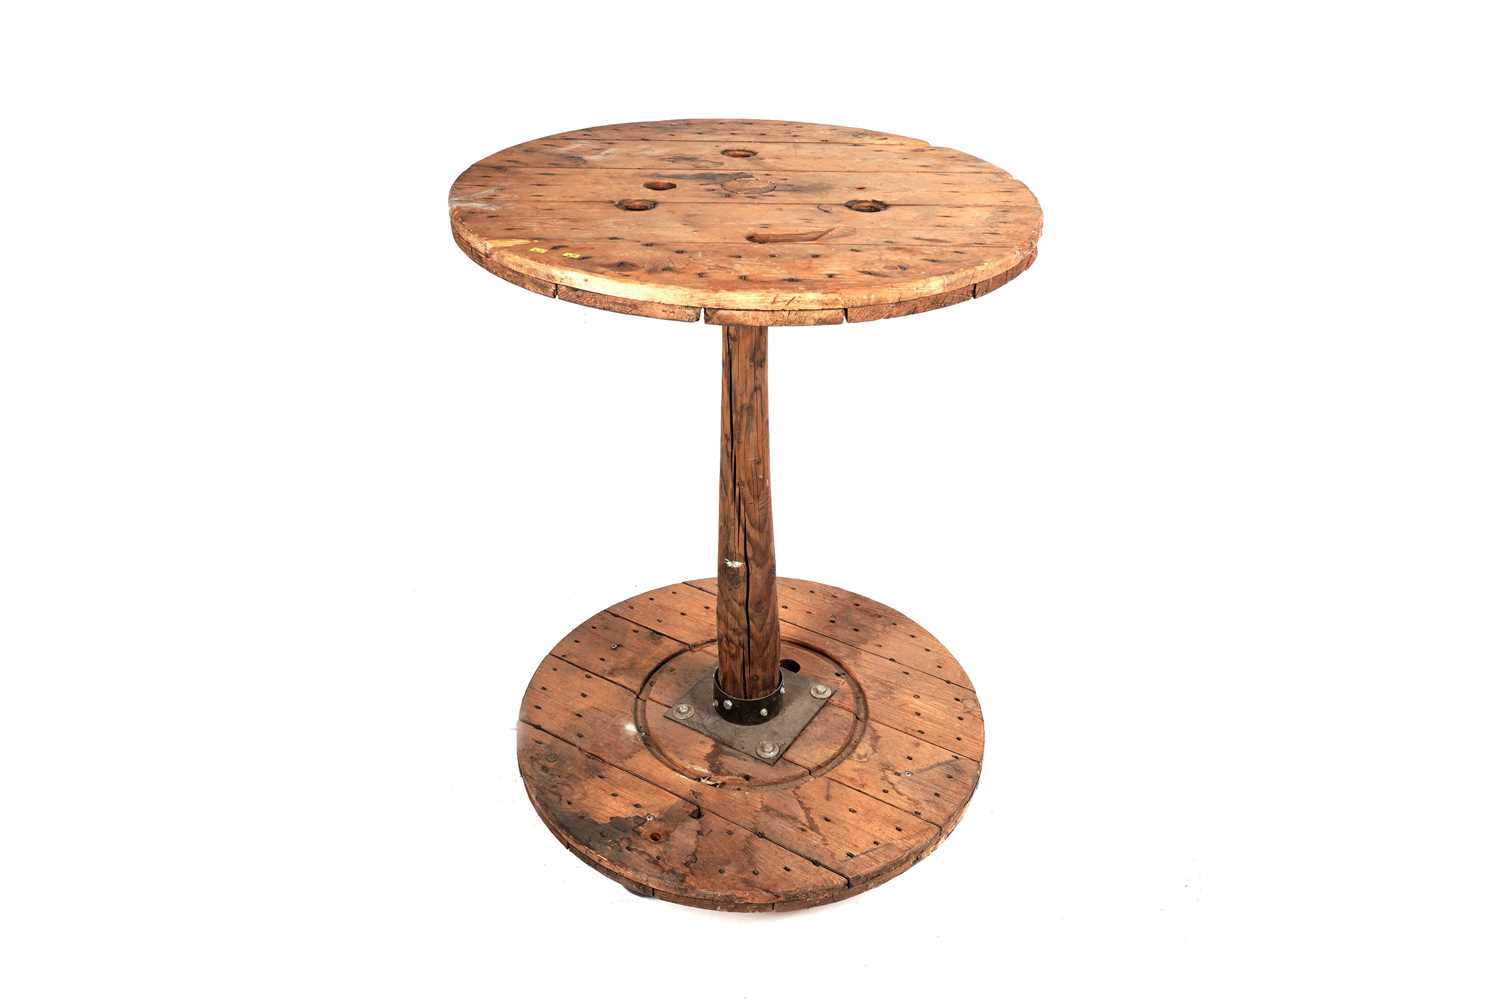 Lot 63 - A wooden patio bar table